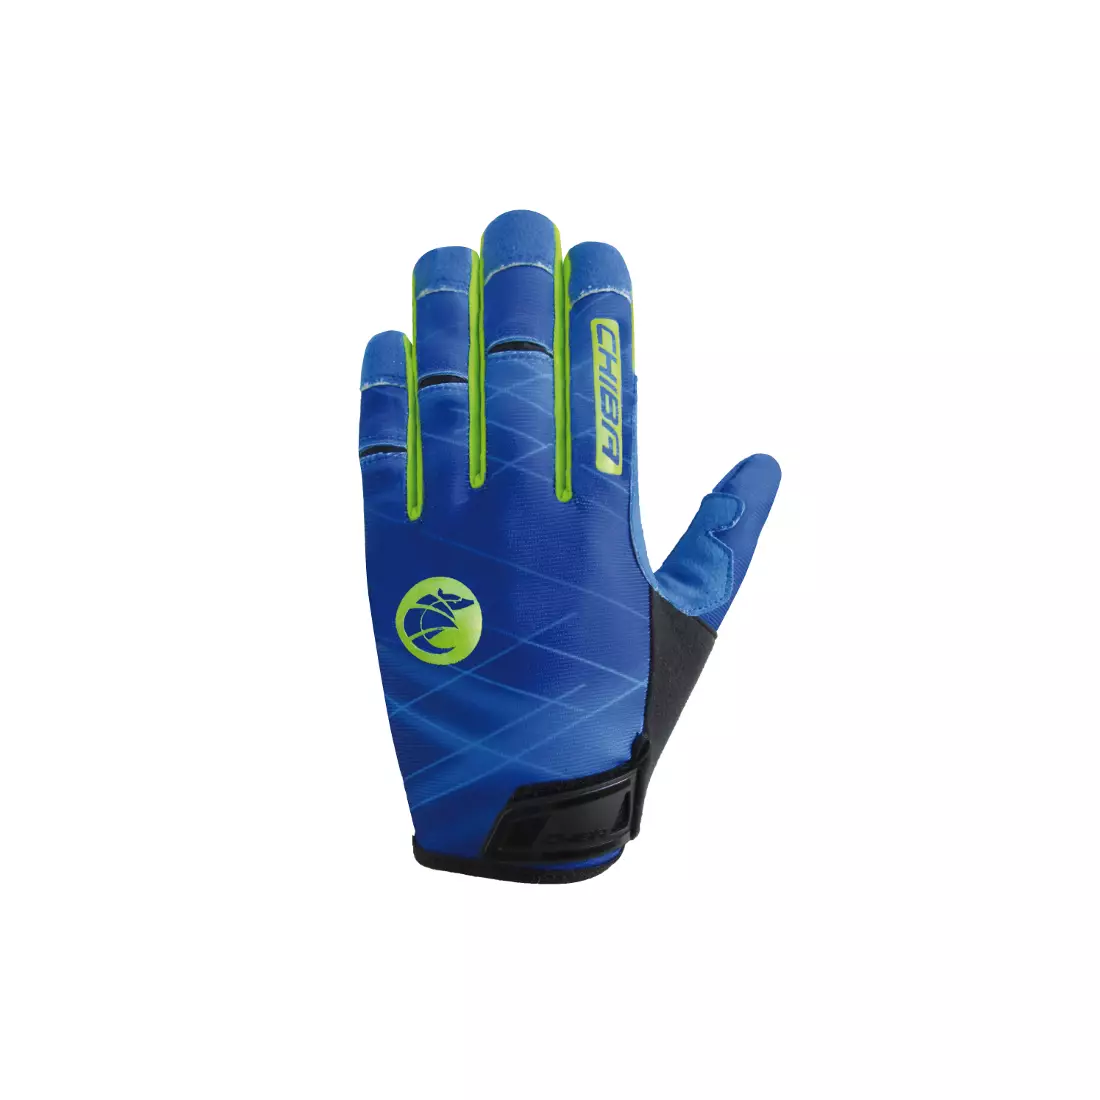 CHIBA cycling gloves TWISTER, blue 30737